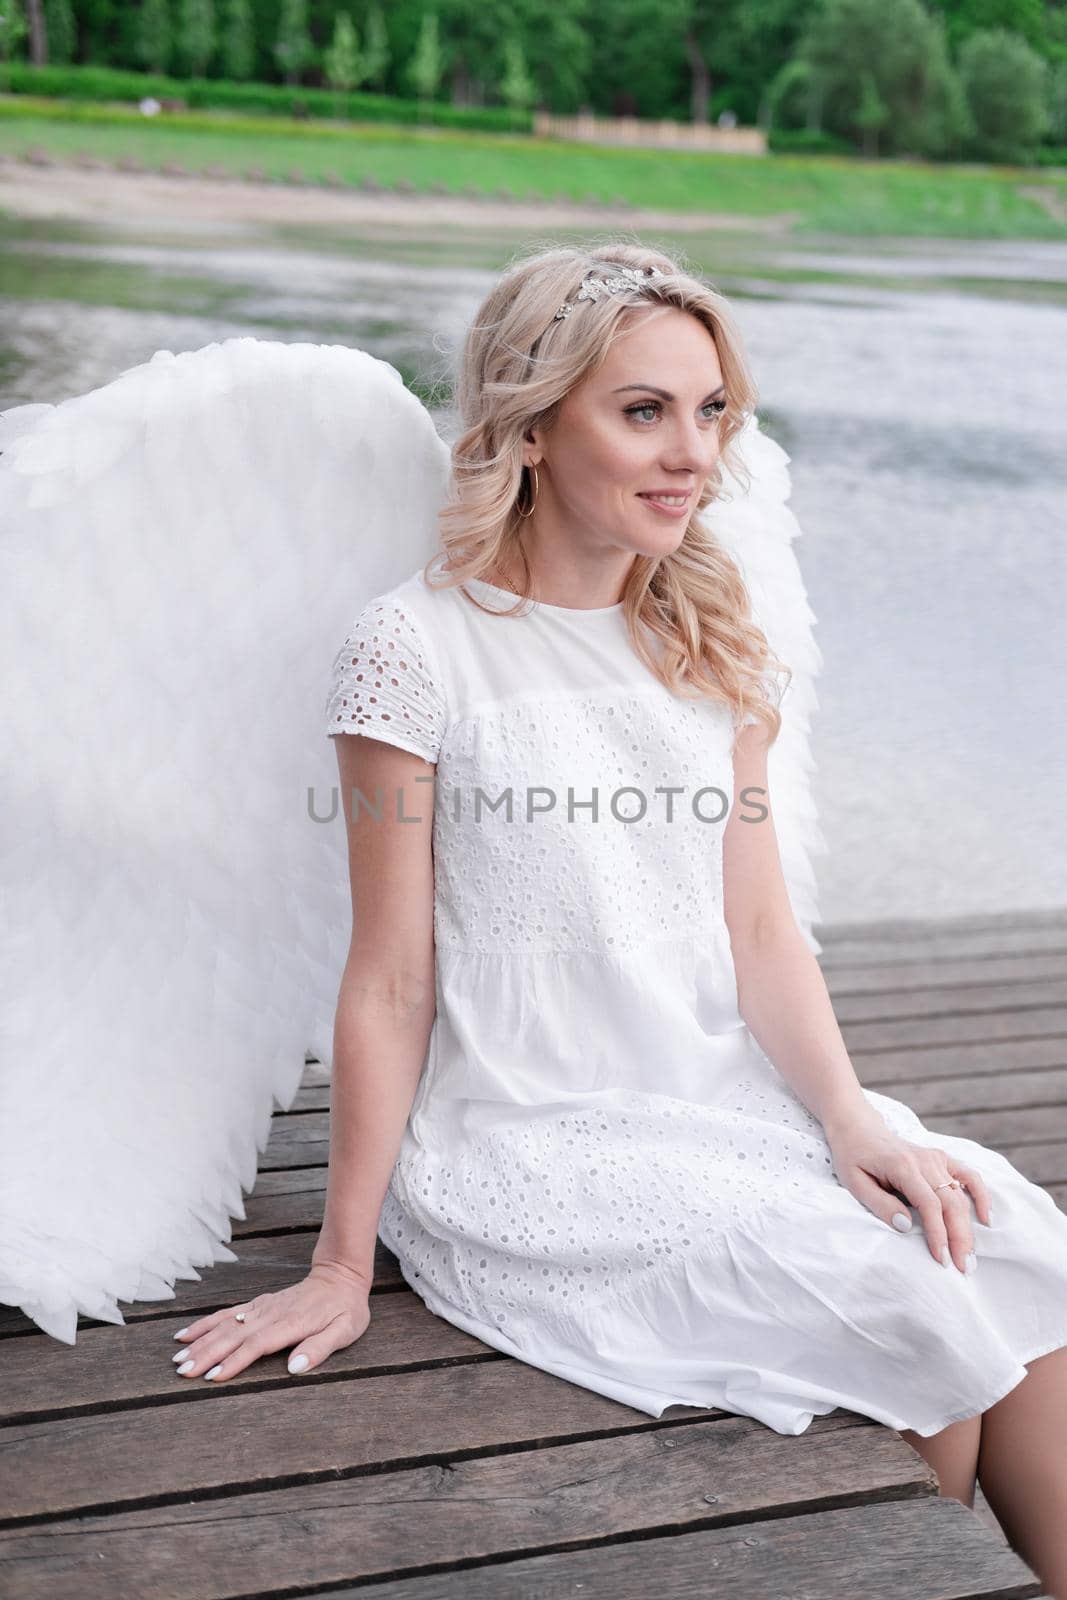 portrait of blonde woman in white dress and white angels wings. good people. heaven, god. paradise angel.